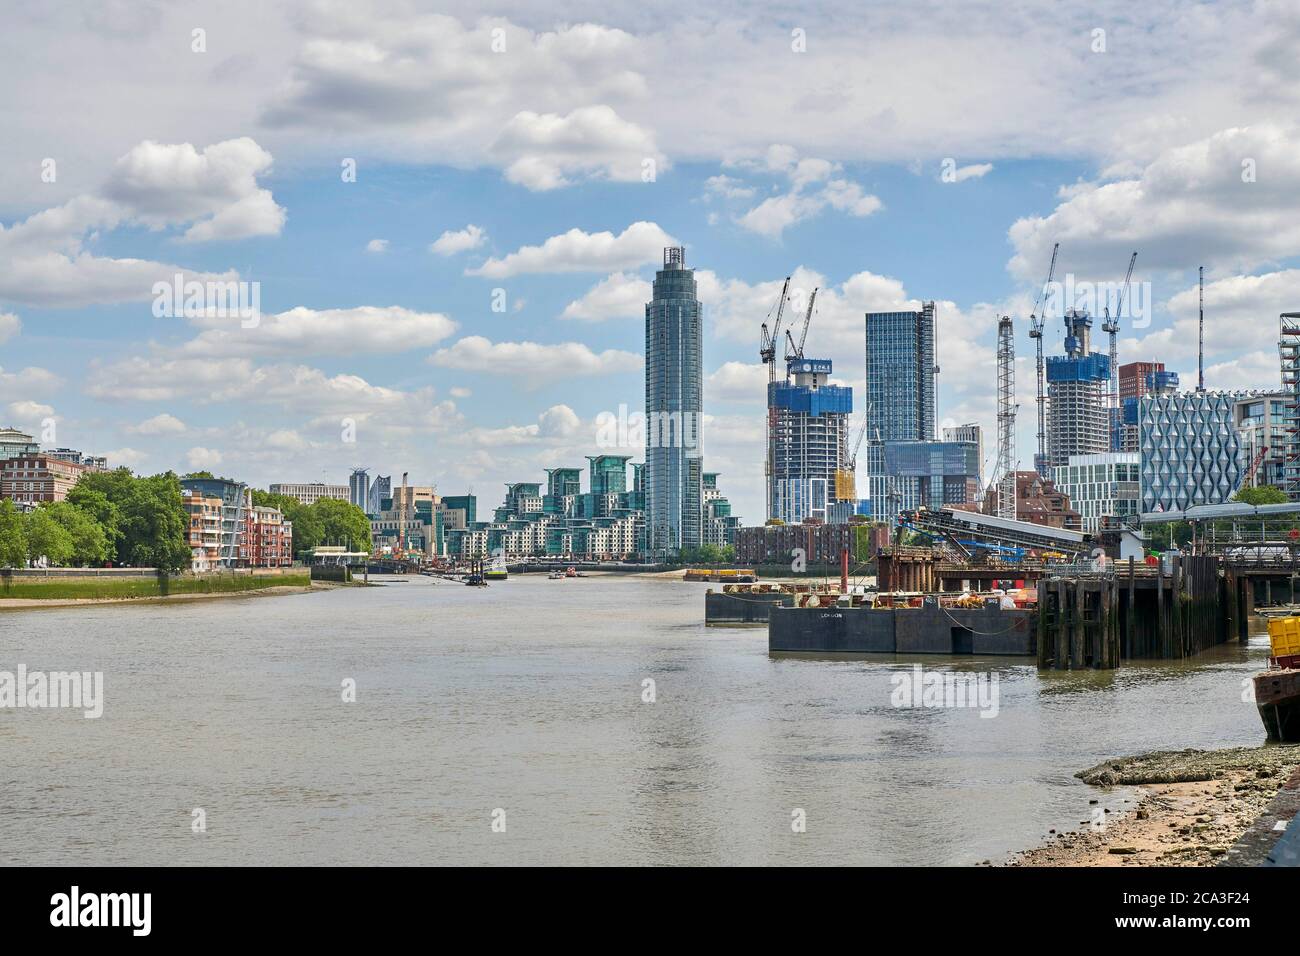 Looking down the River Thames, shot from Battersea area showing tower block development in SW , London, UK, funded by russian, chinese money Stock Photo